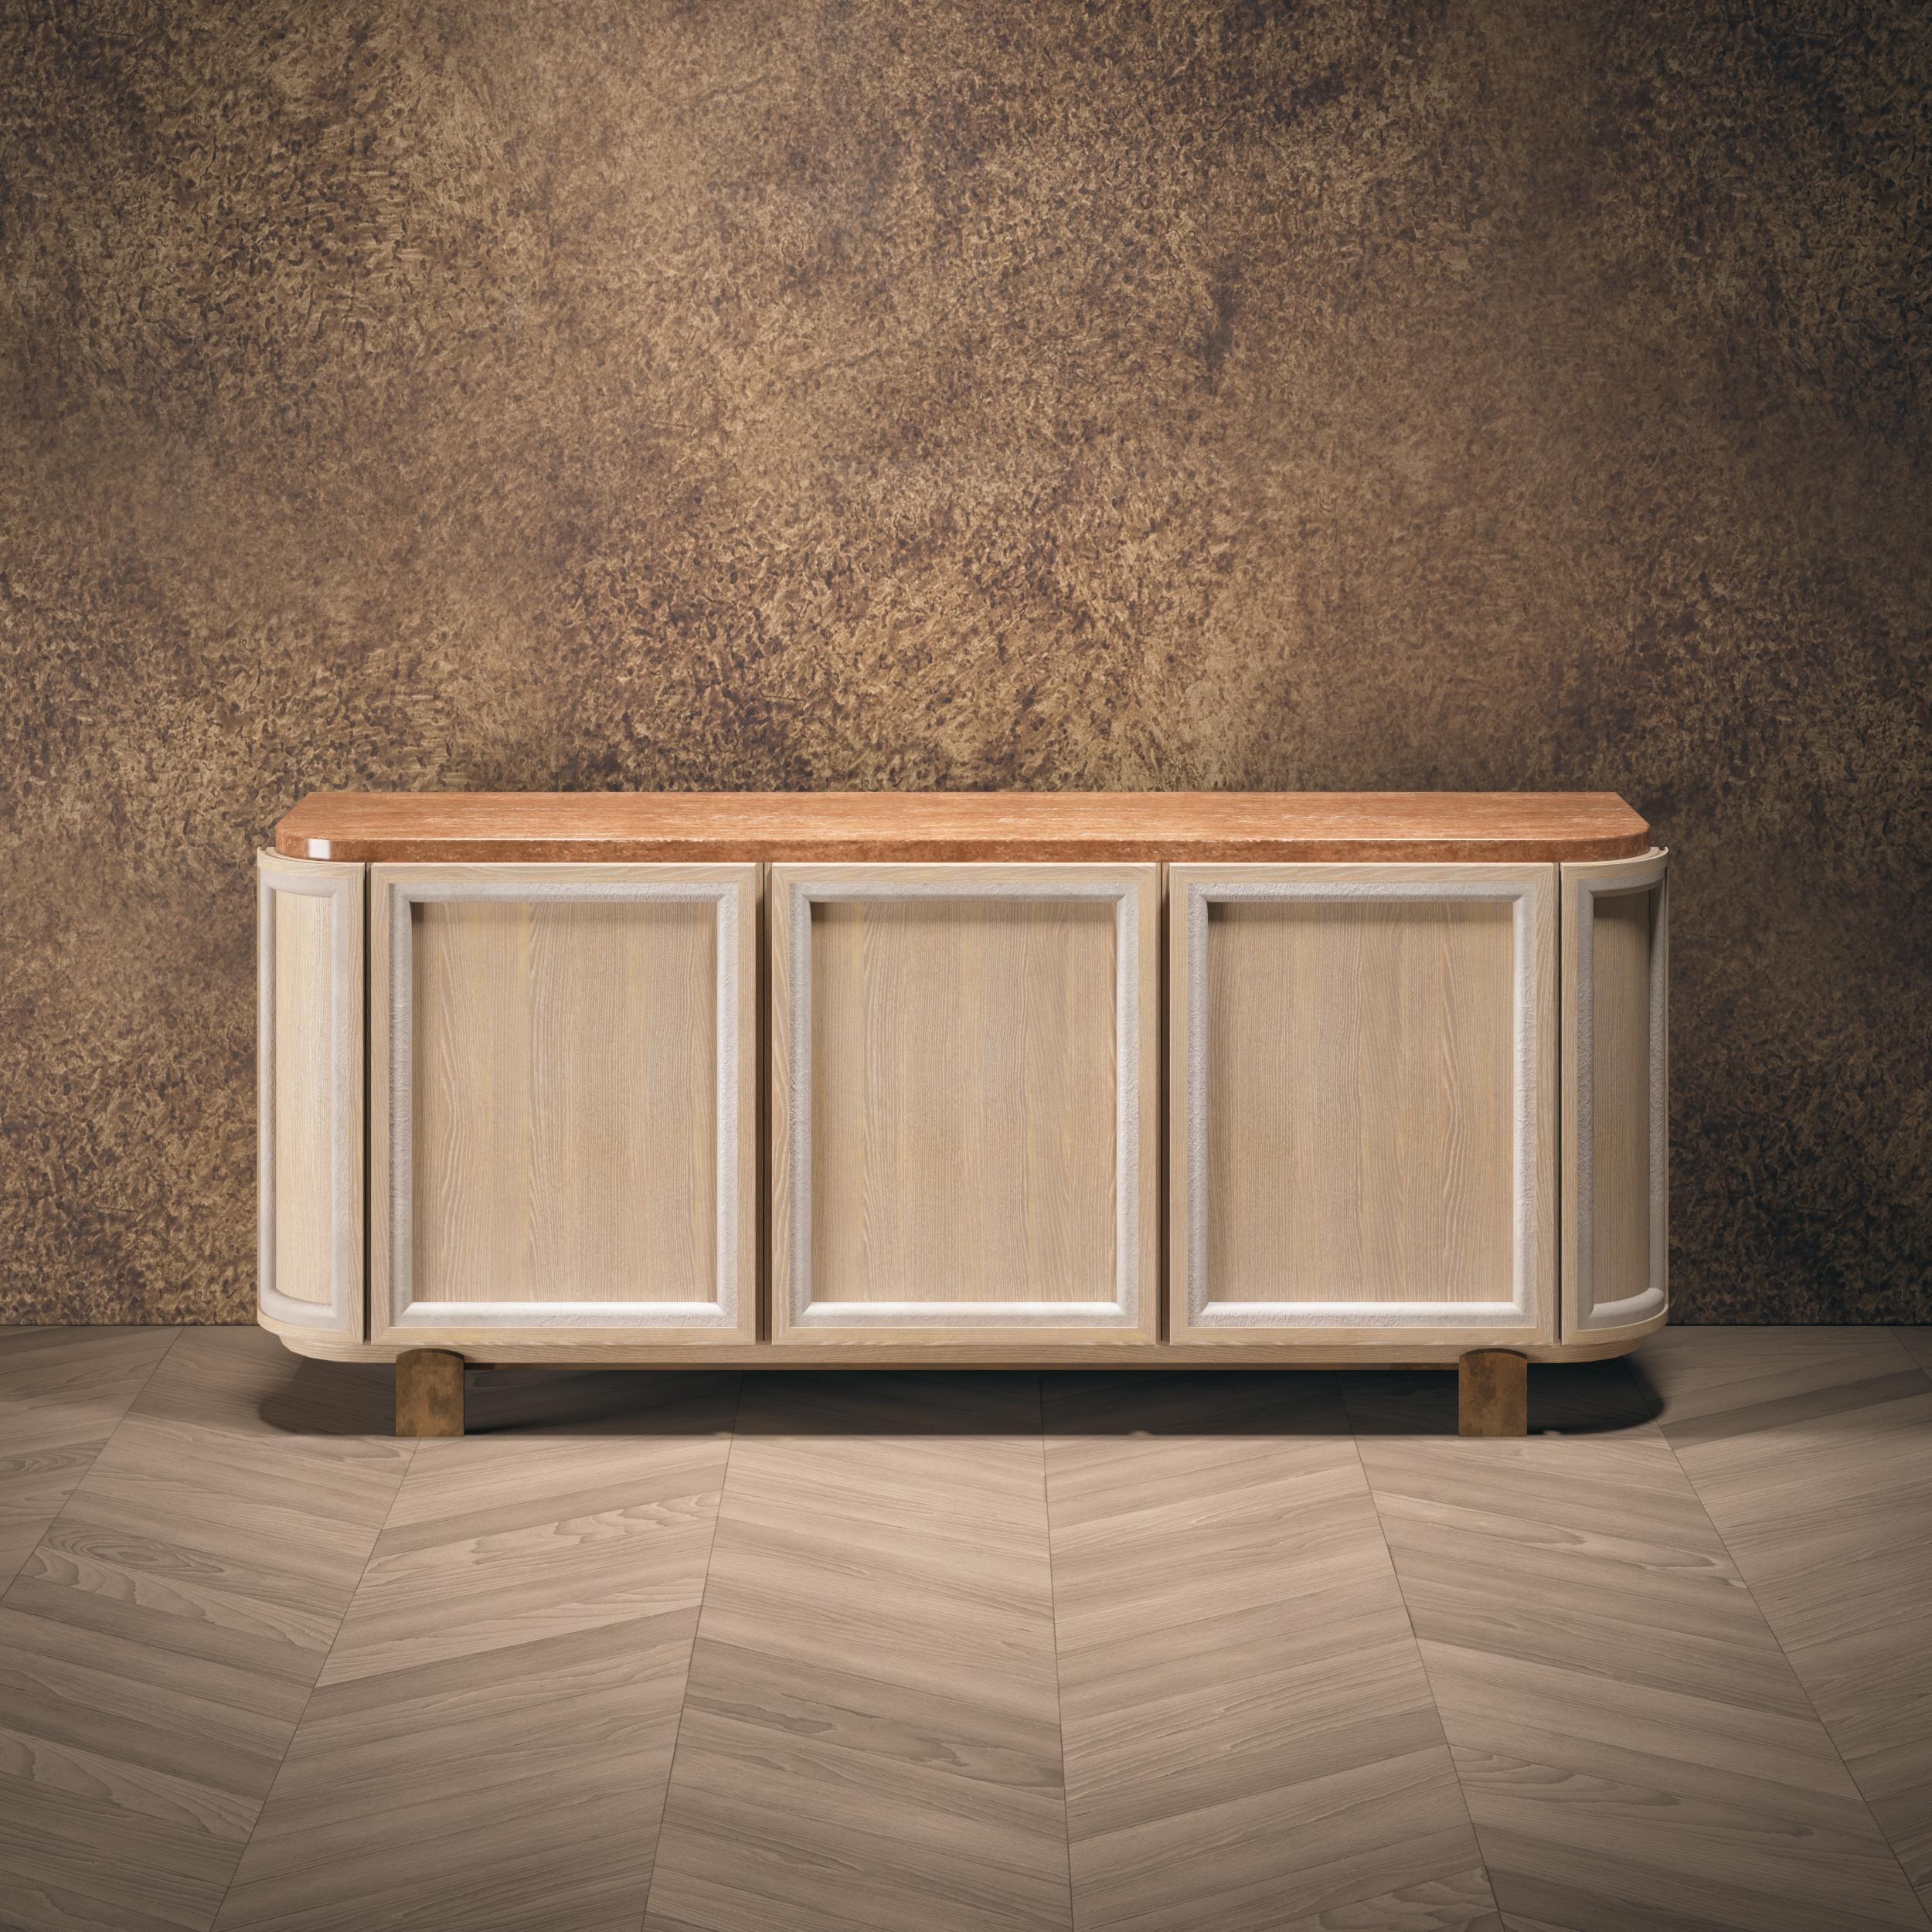 ‘Döngü’ is a simple yet sophisticated sideboard, a spacious storage space
 with a mother-of-pearl wood finish, and delightfully crafted handles with
our signature touch; the leather patterned lacquer.
Material & Finish
Body: Oak veneer
Top: